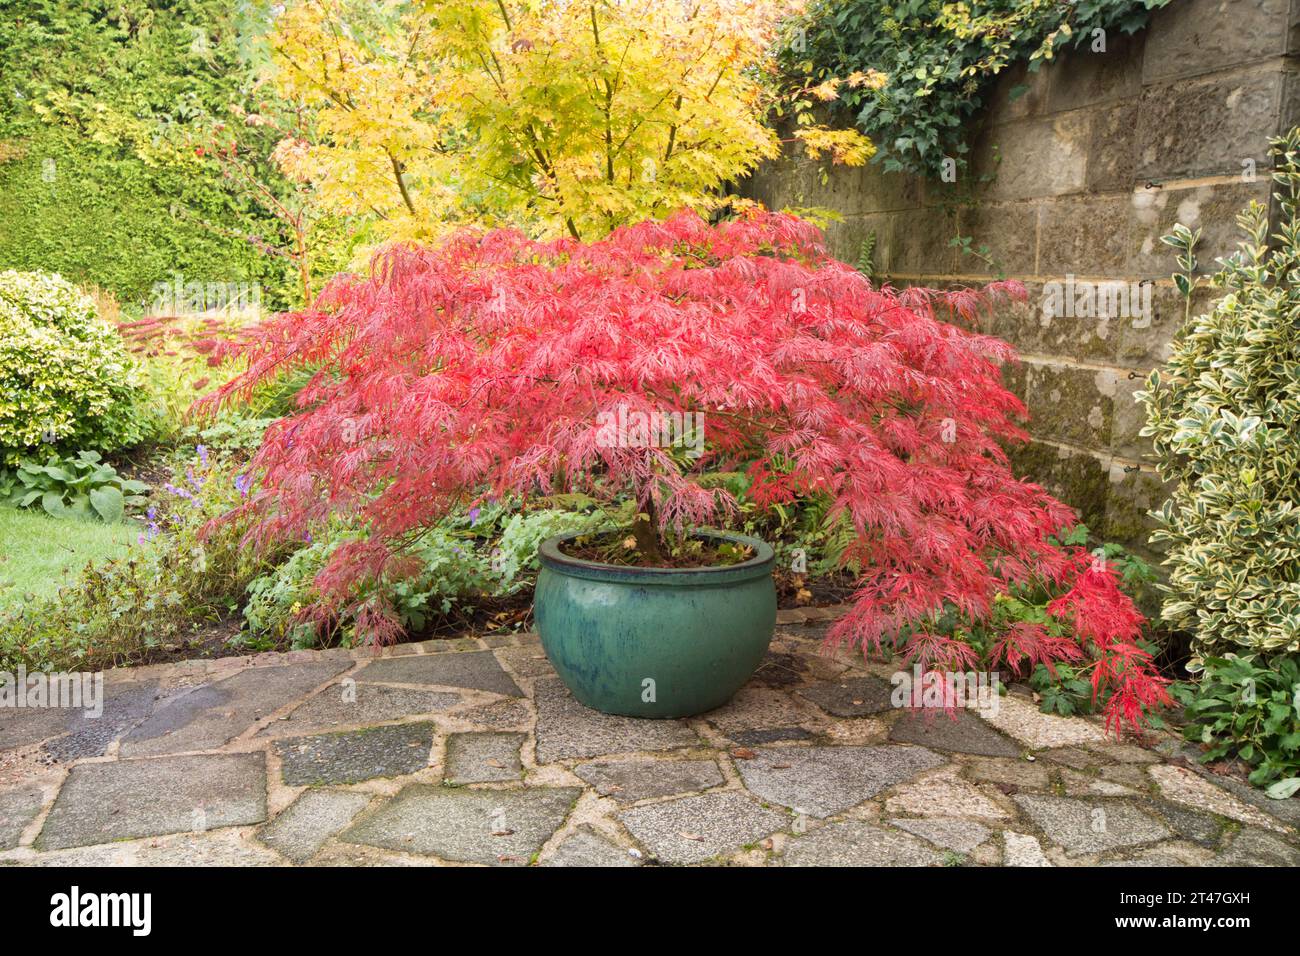 Acer palmatum dissectum Garnet, Japanese maple, in a green pot on a garden patio, leaves have changed to deep red in autumn colour in fall Stock Photo